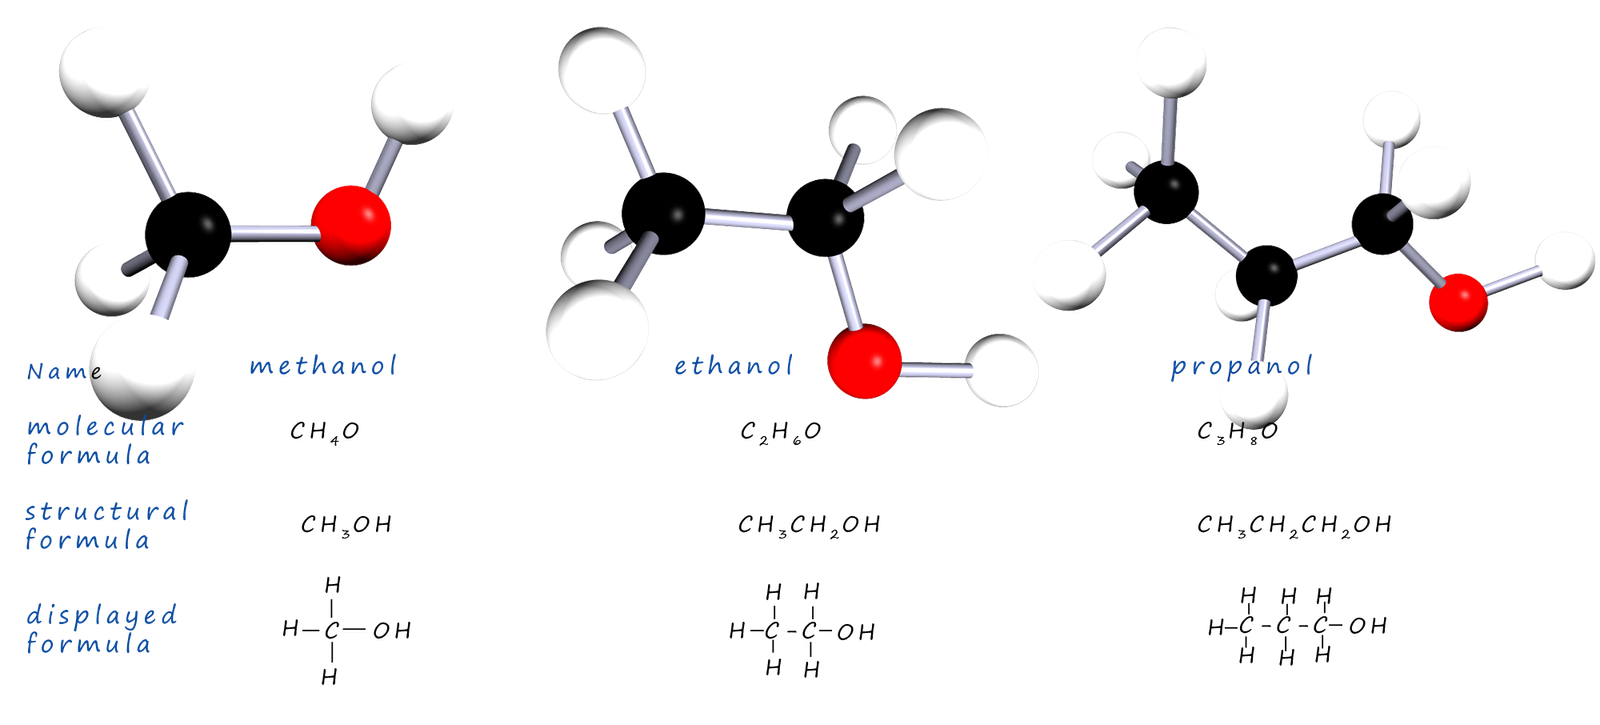 3d models of the first three alcohols, molecular and displayed formula also shown.